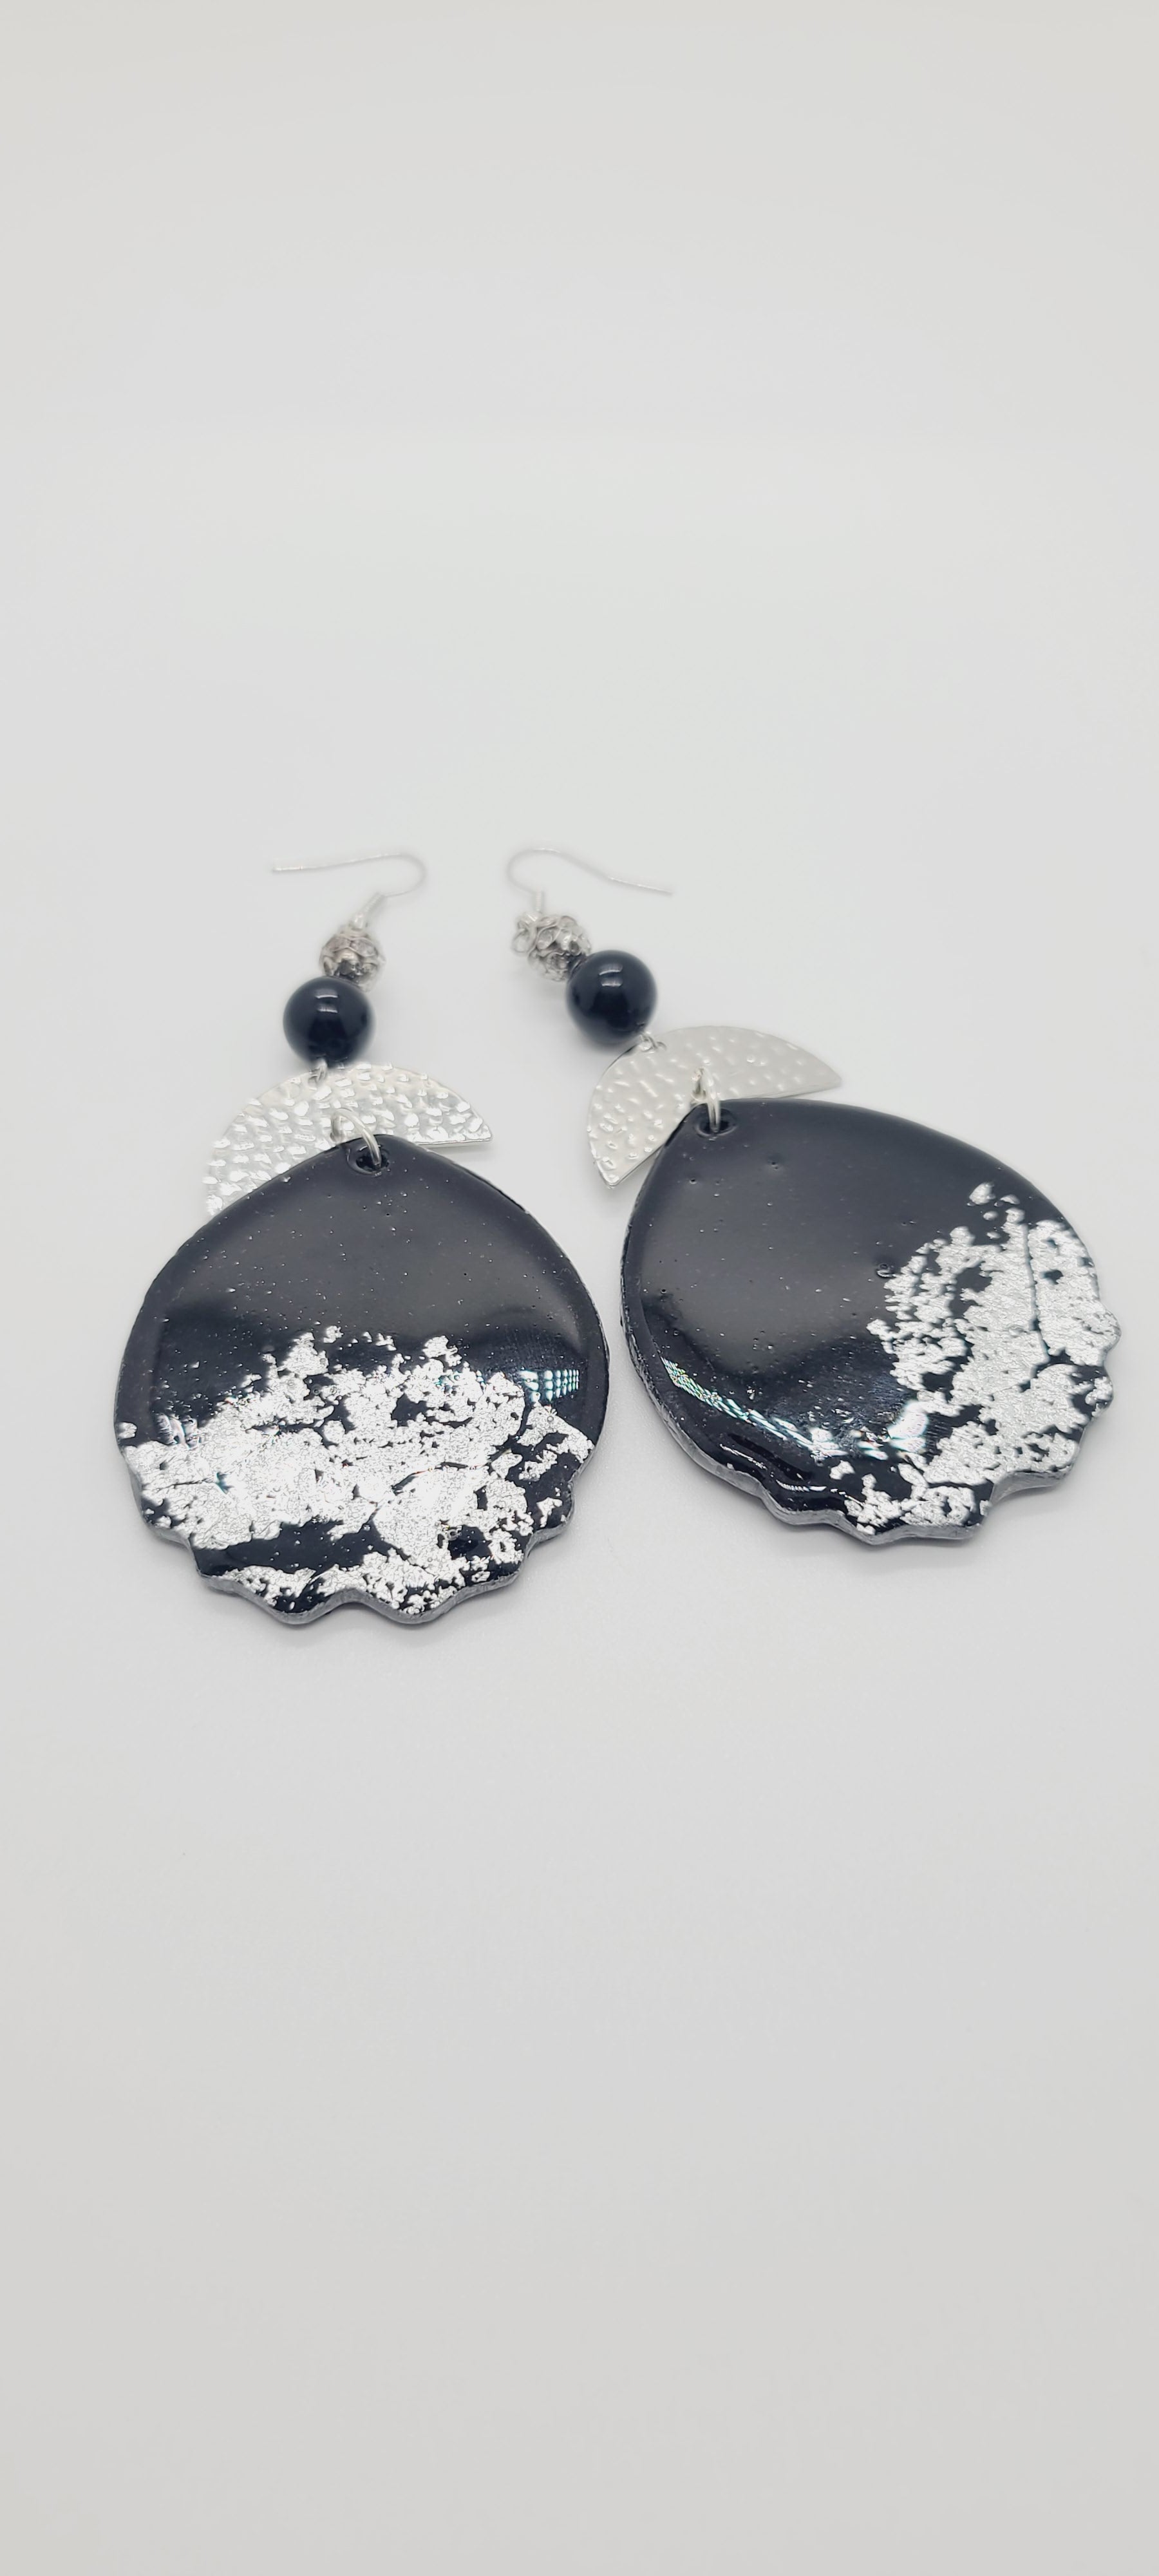 Length: 4 inches | Weight: 1.2 ounces  Distinctly You! These earrings are made with black and silver embossed polymer clay, silver hammered curved charms, and 10mm black Onyx beads, and silver filigree beads.